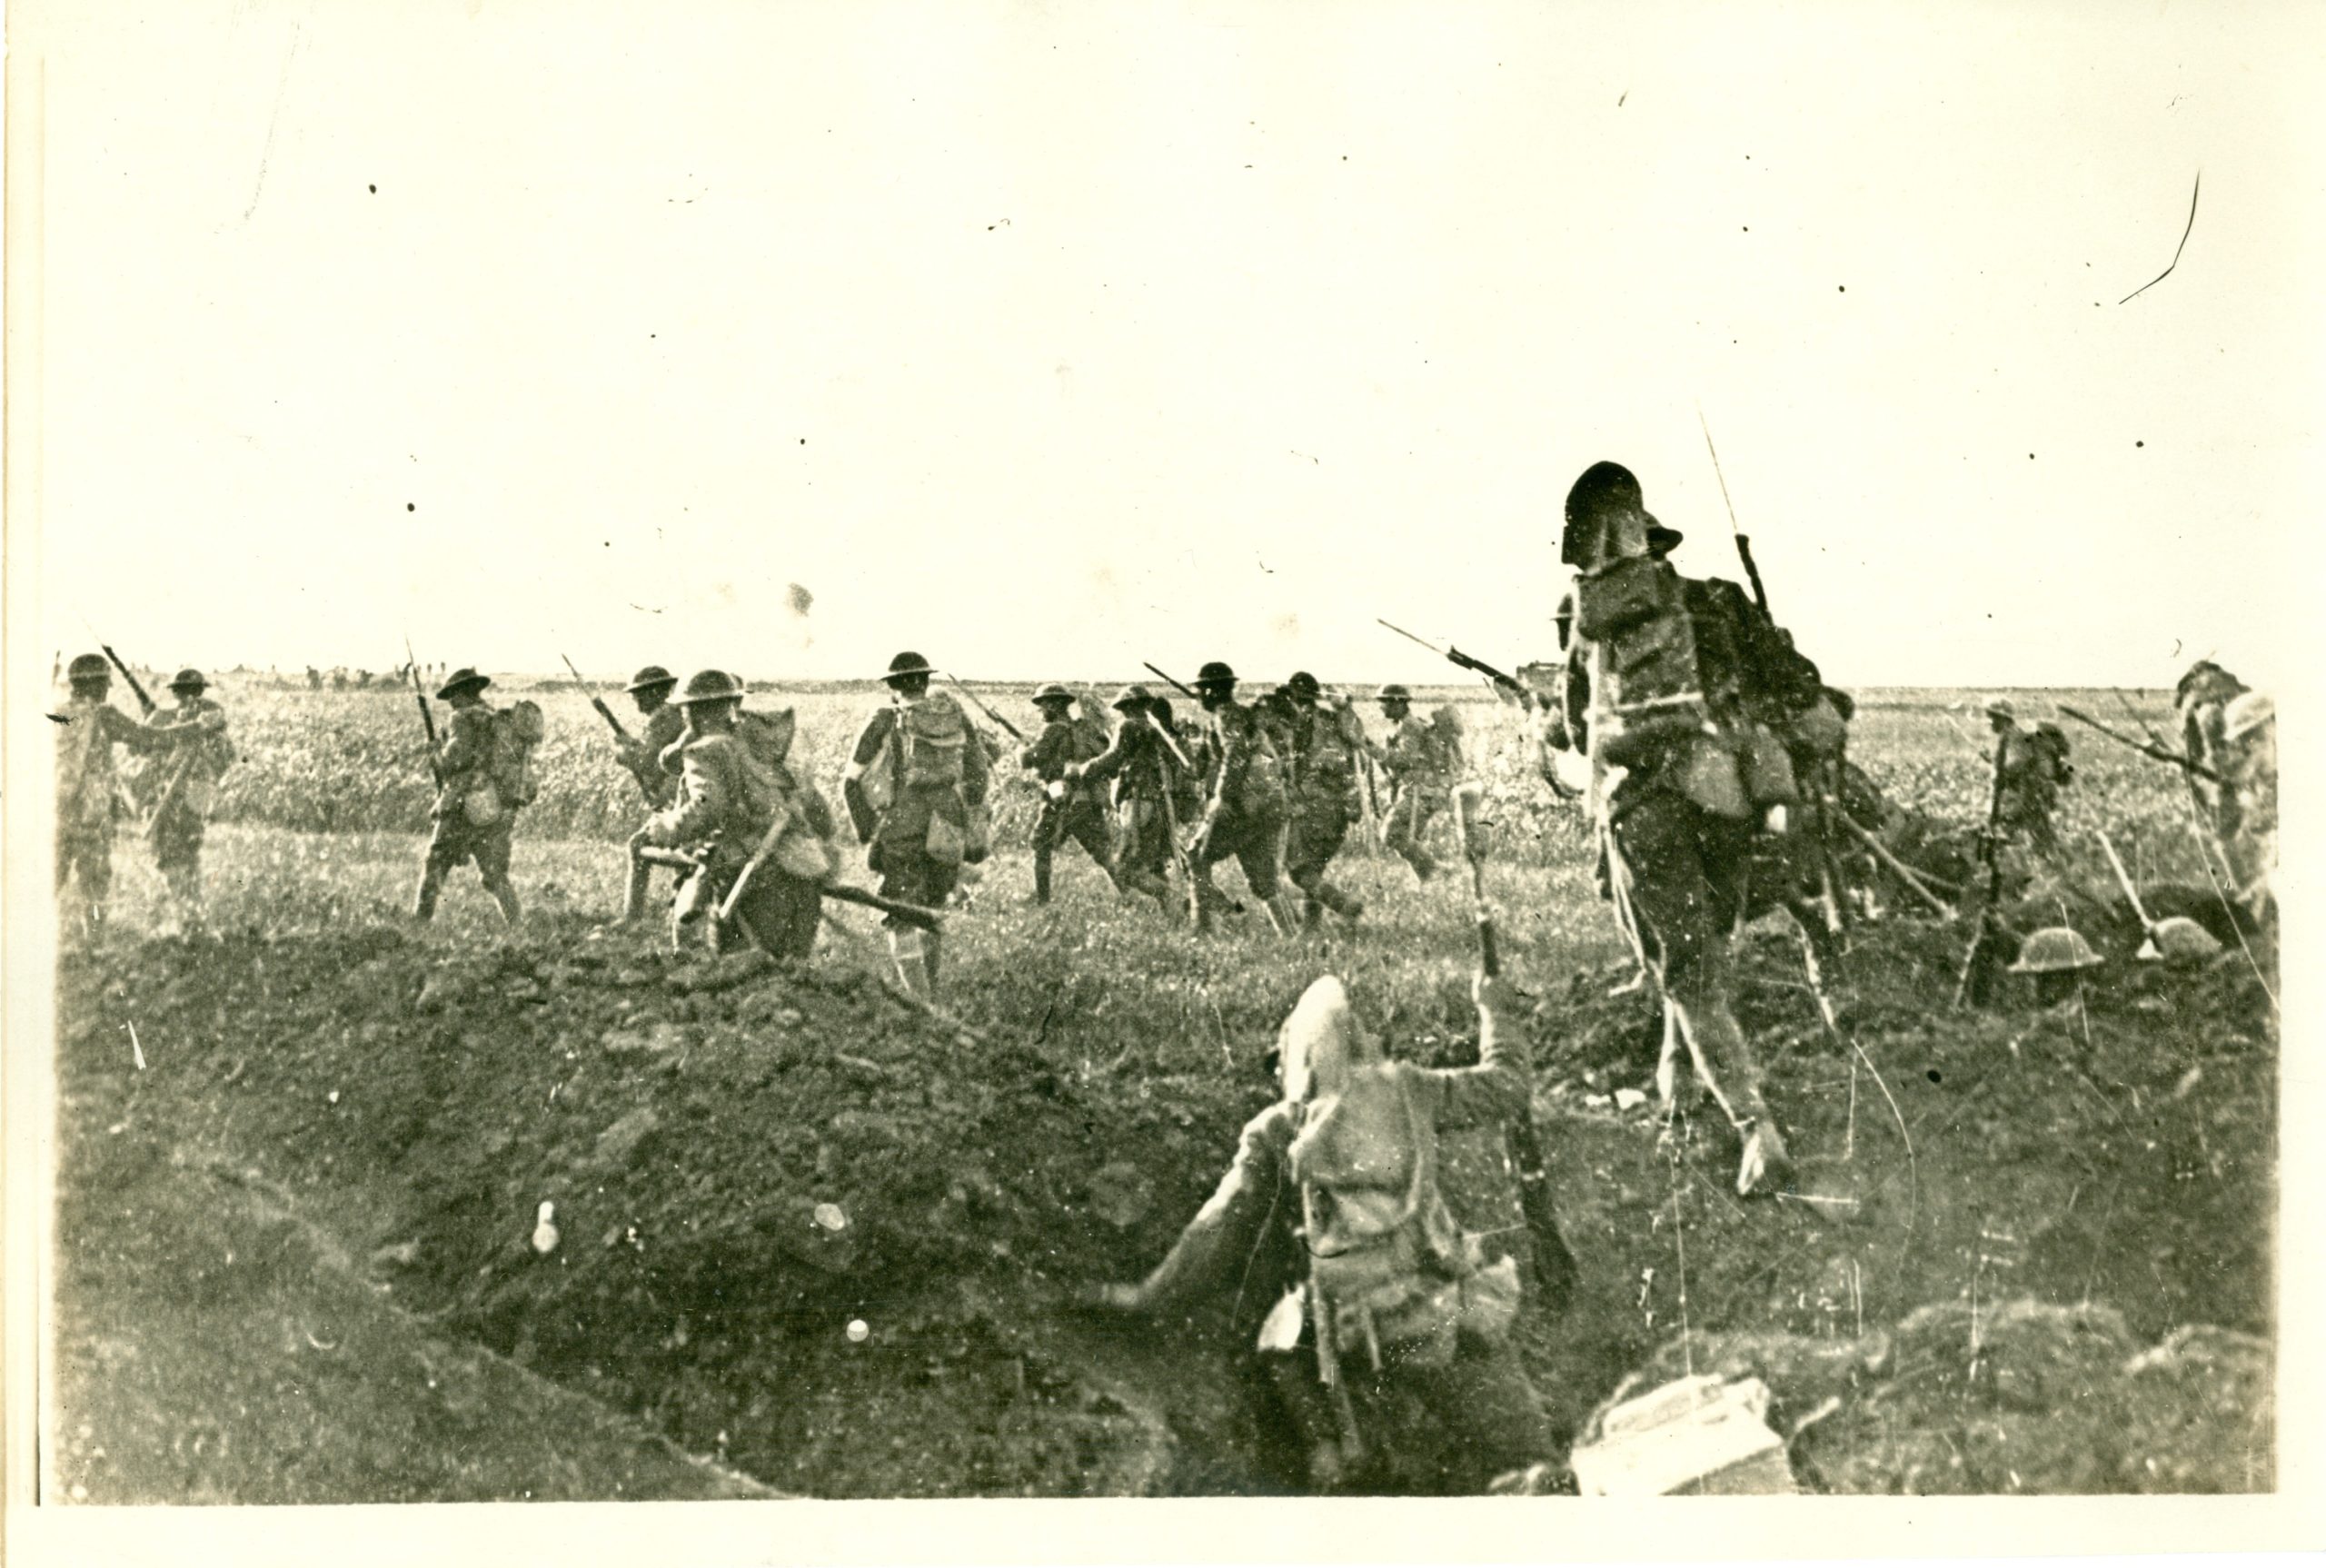 Soldiers leaving trenches, Cantigny